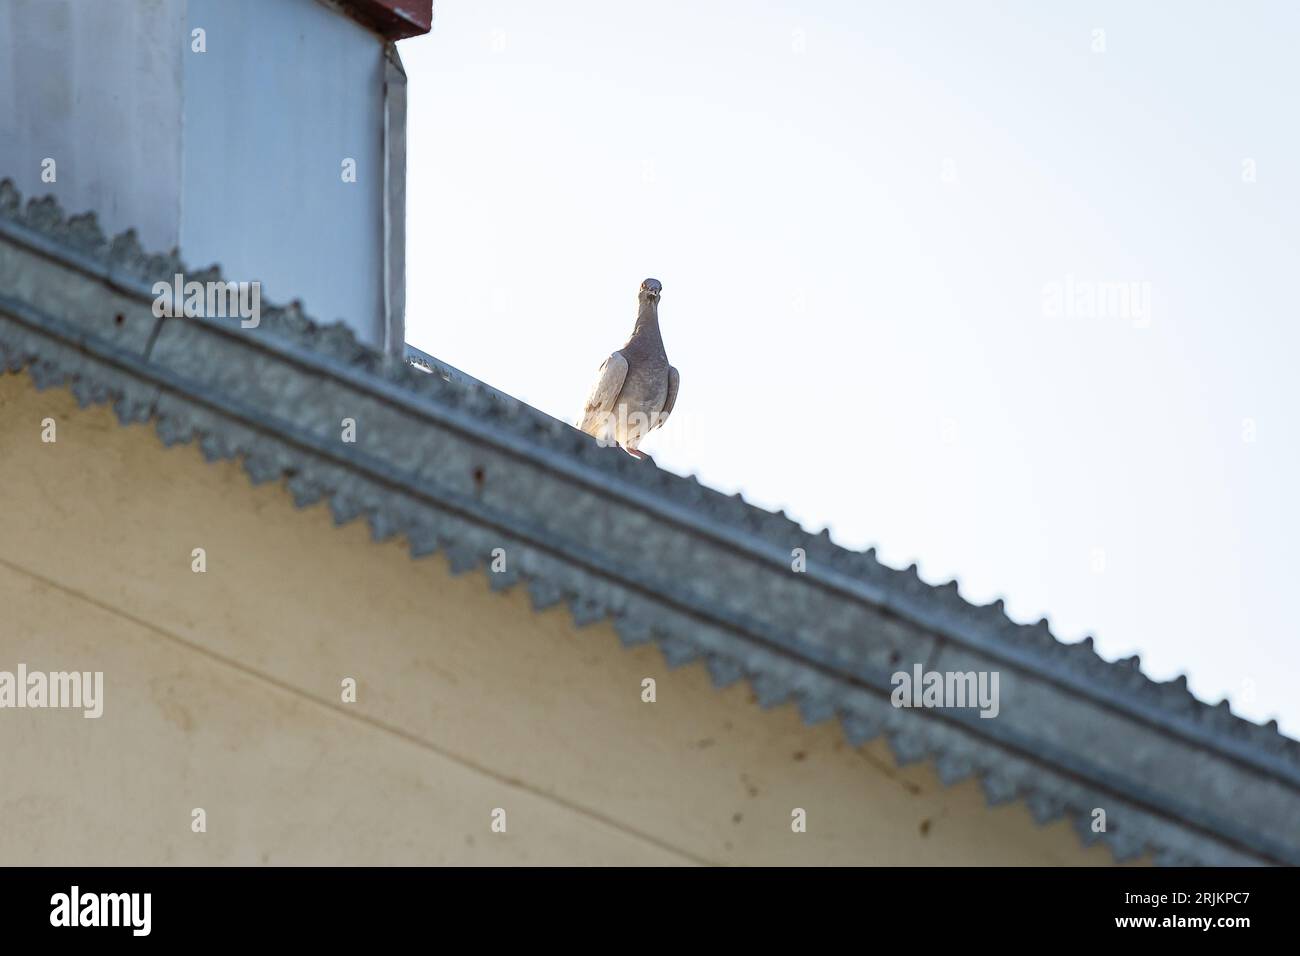 A rock dove perched atop a modern, urban structure surveys its surroundings Stock Photo